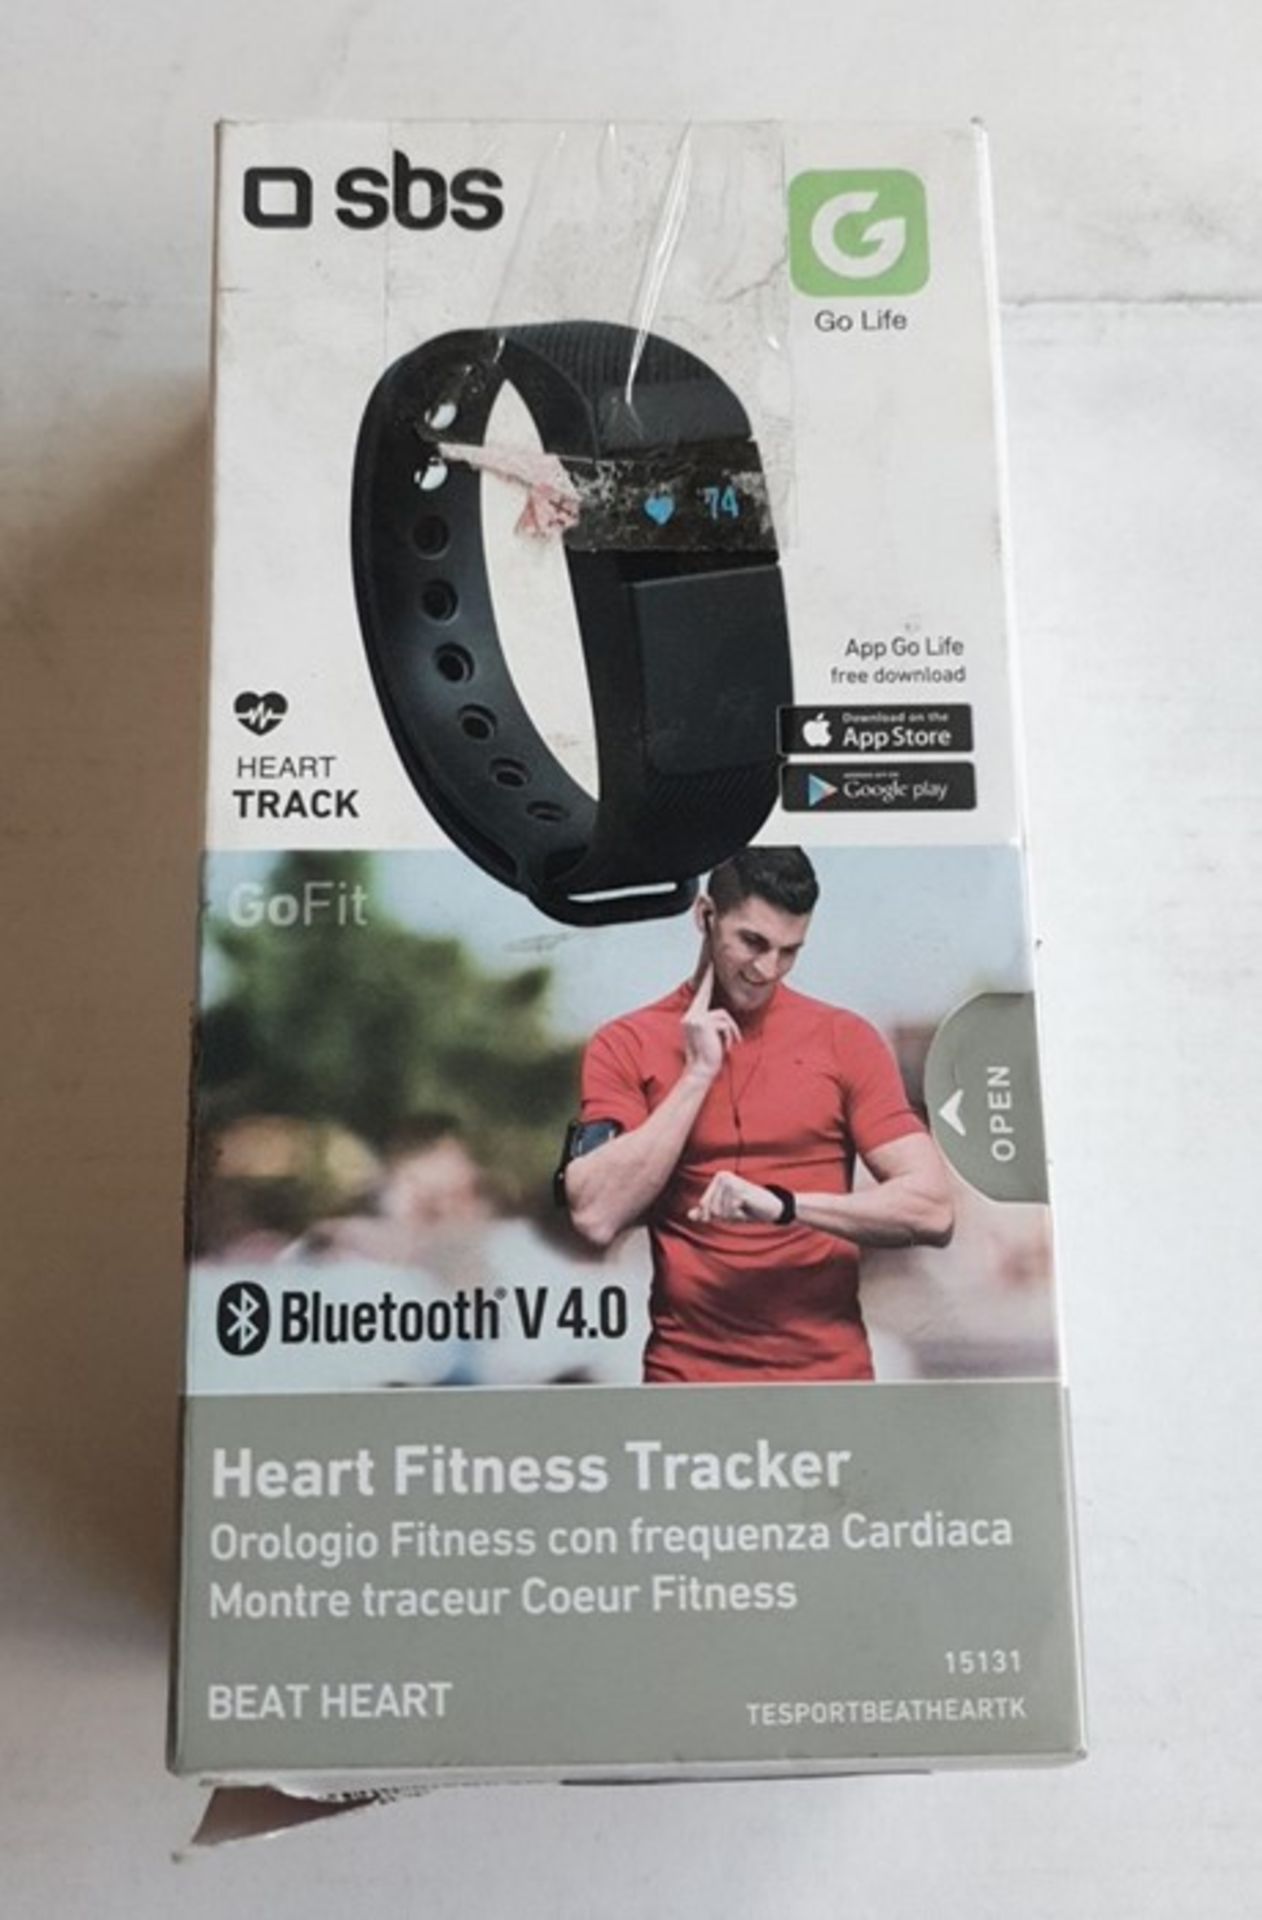 1 BOXED SBS GOFIT HEART TRACKER - BLACK / BL - 5343 / RRP £18.99 (VIEWING HIGHLY RECOMMENDED)